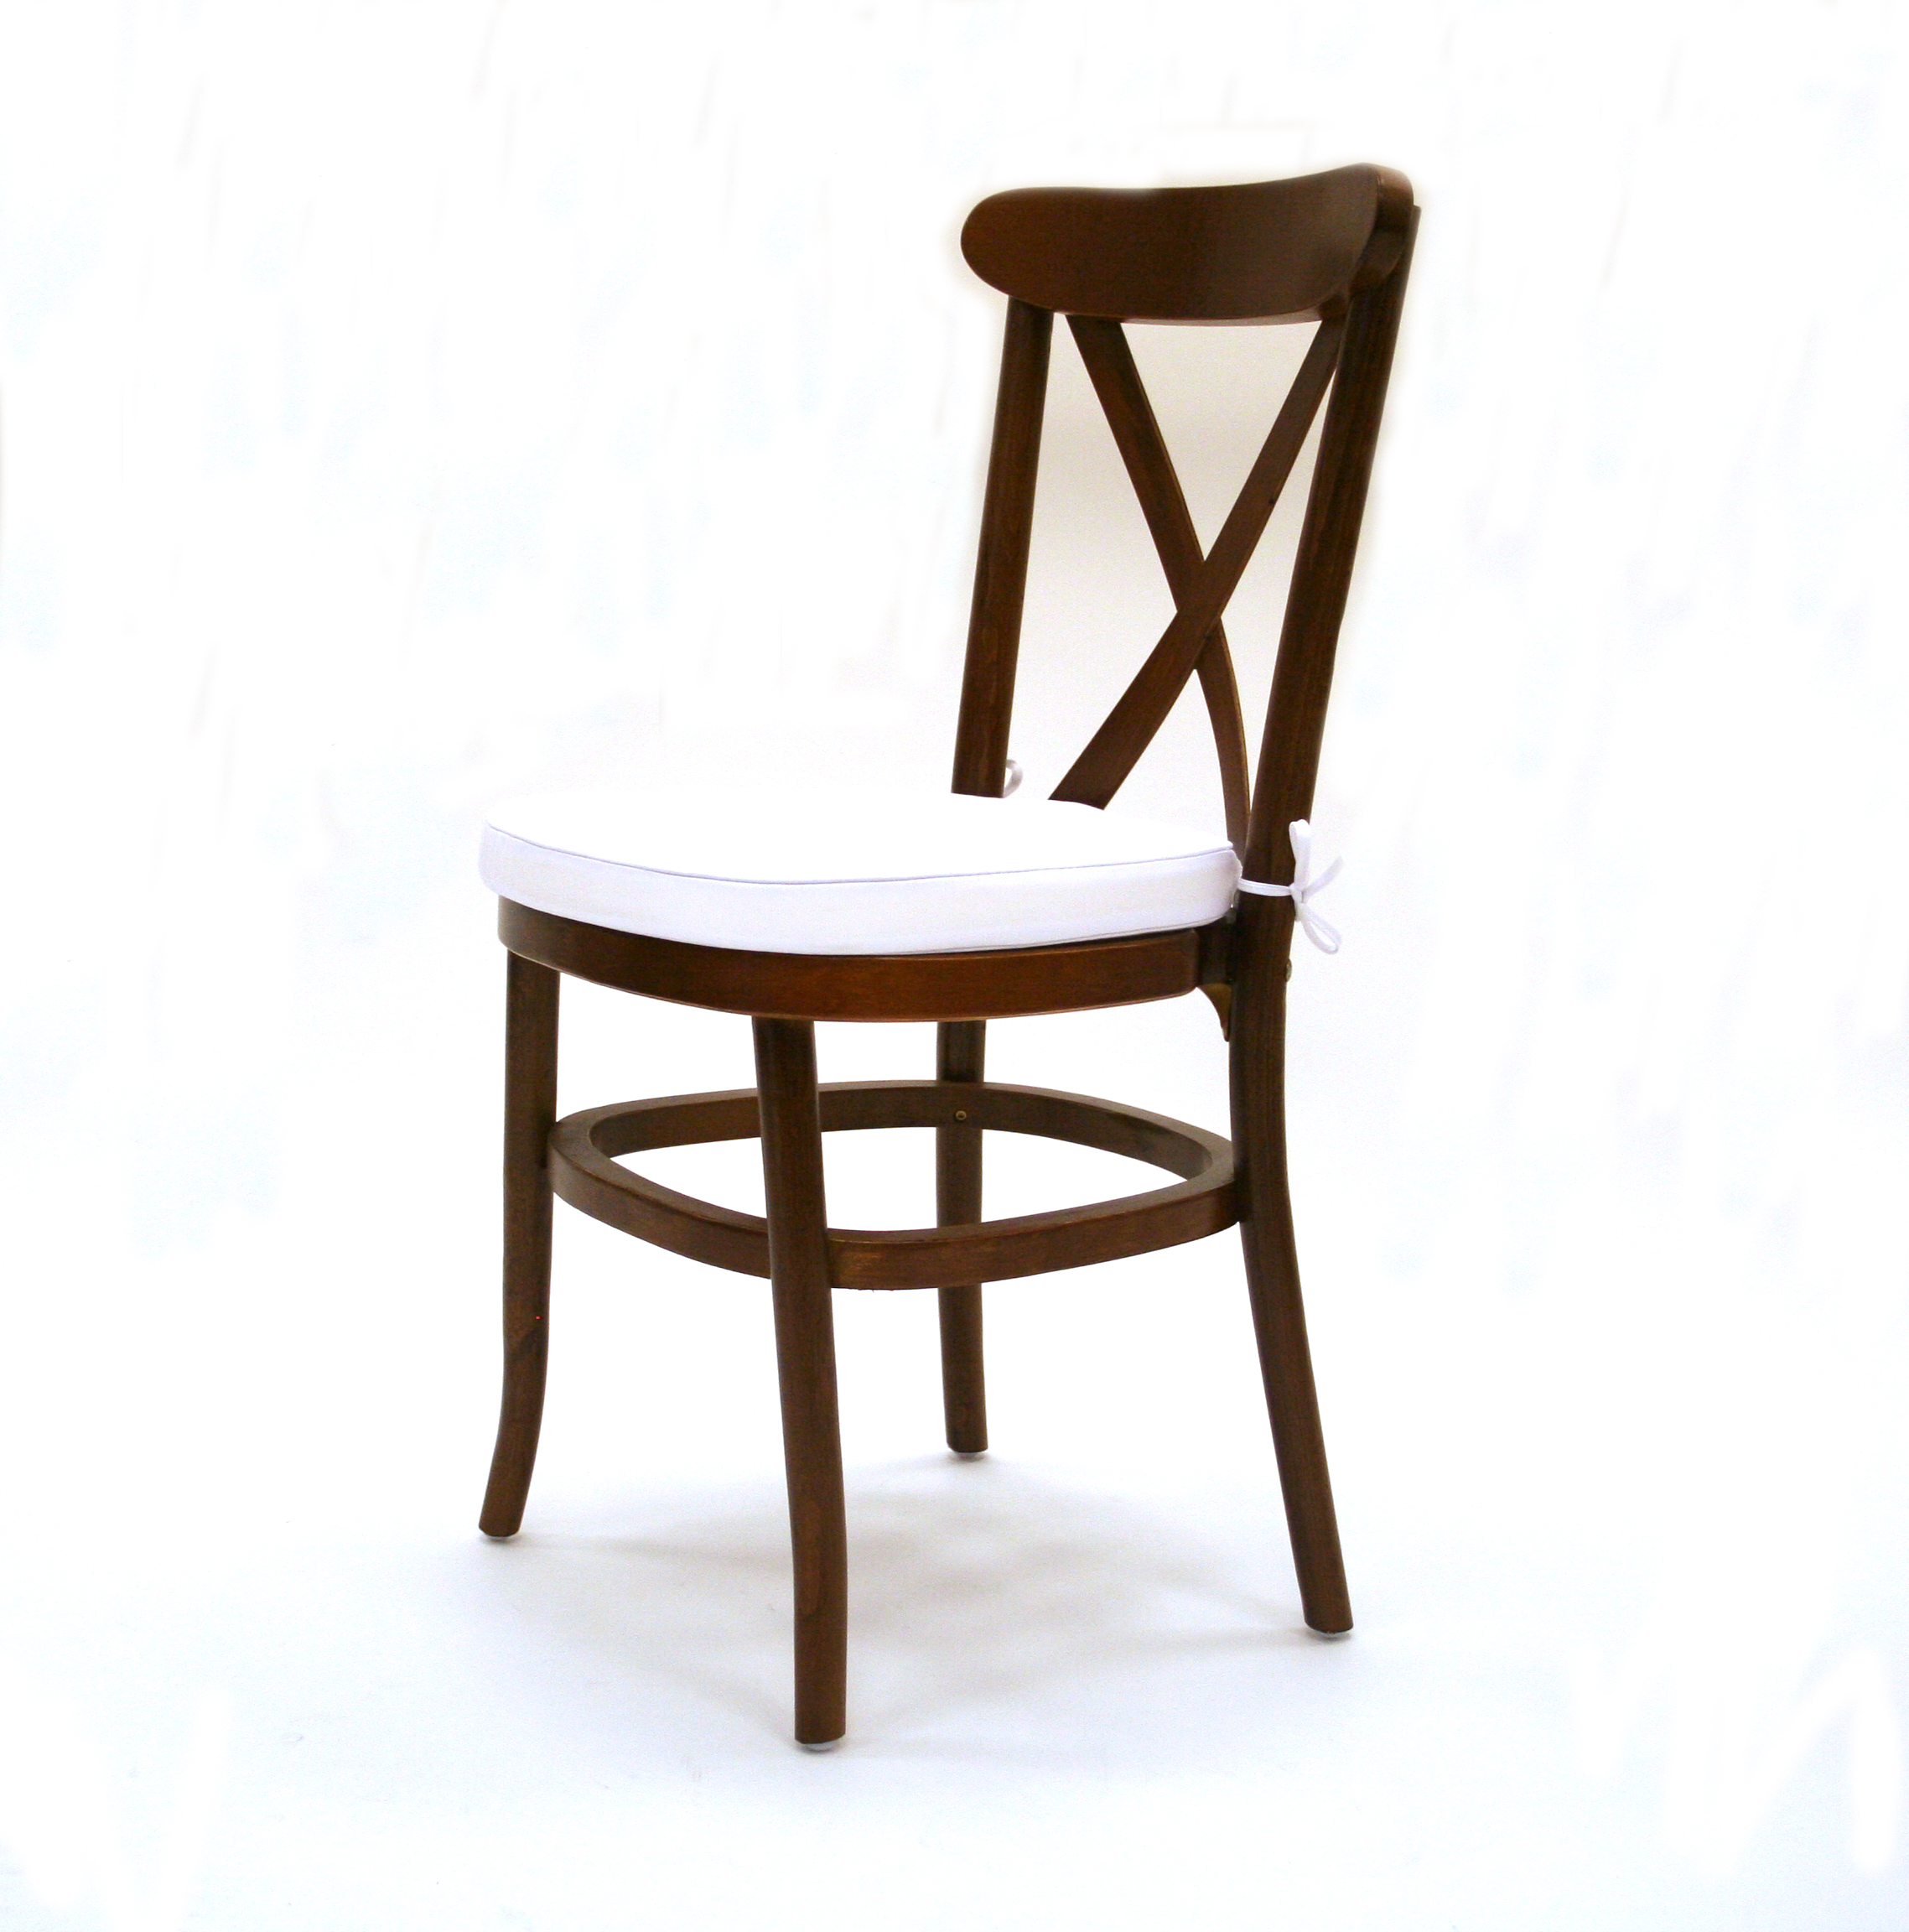 Traditional cross back chair - BE Event Hire